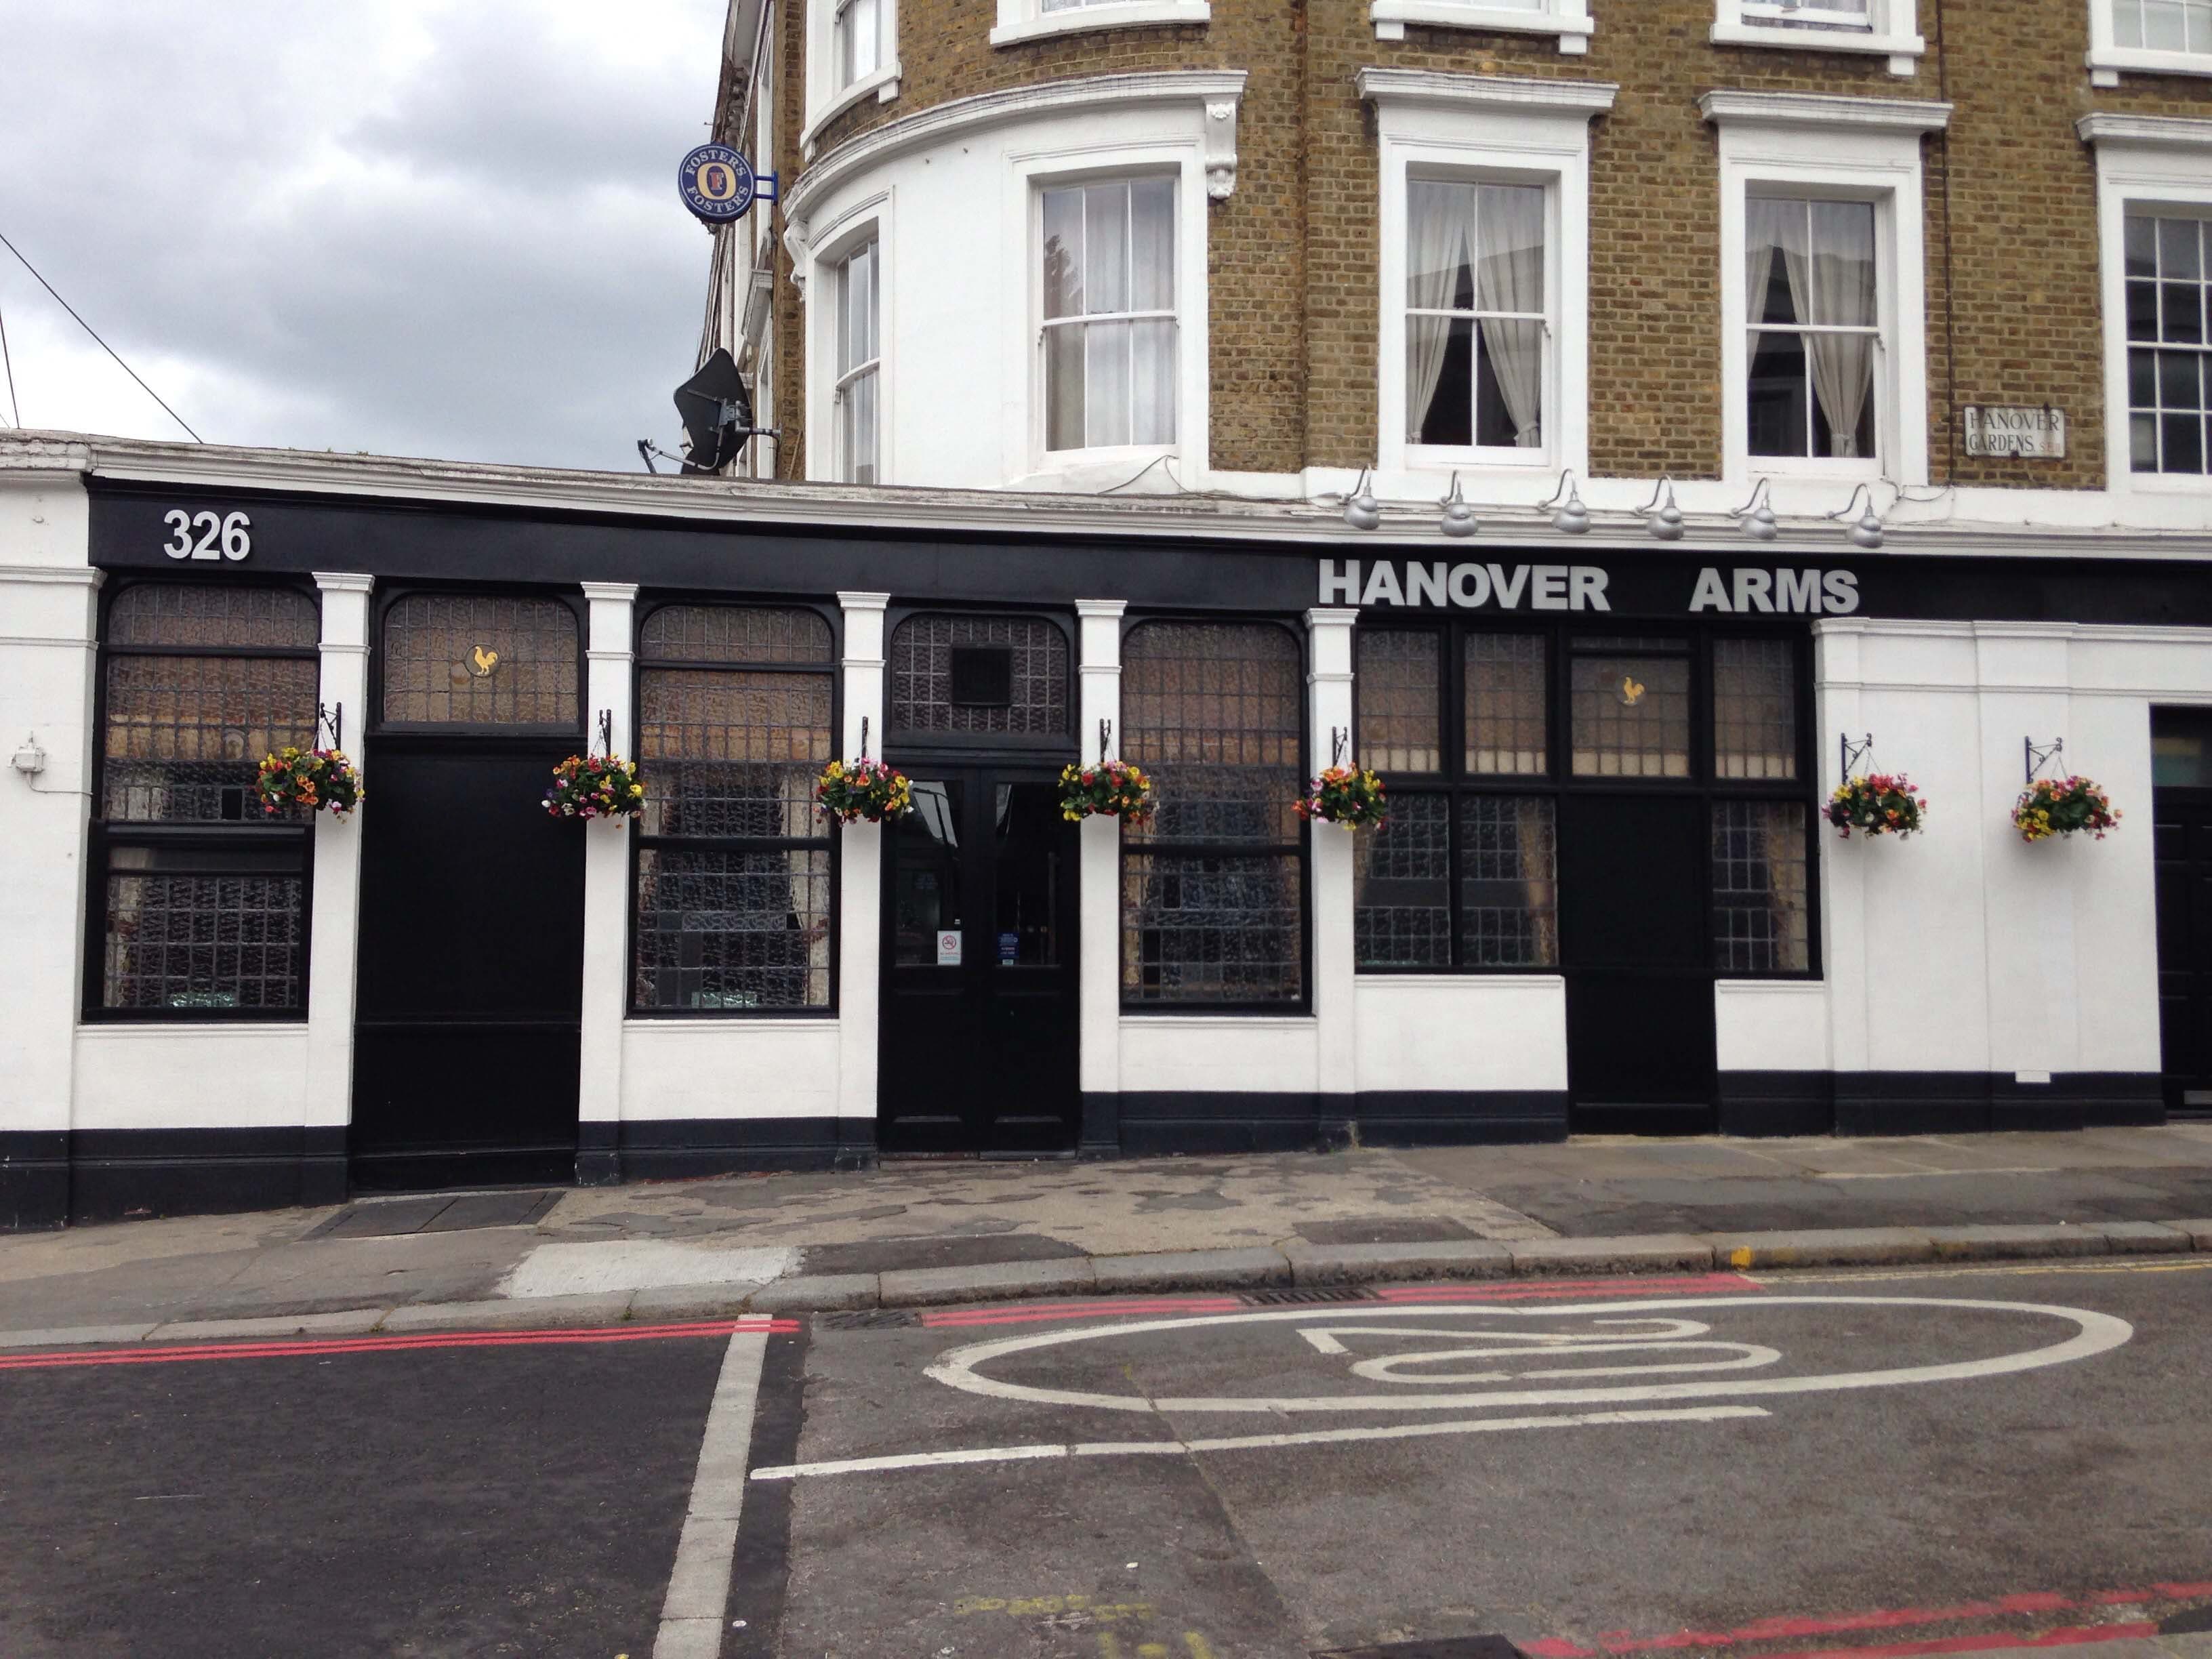 The Hanover Arms